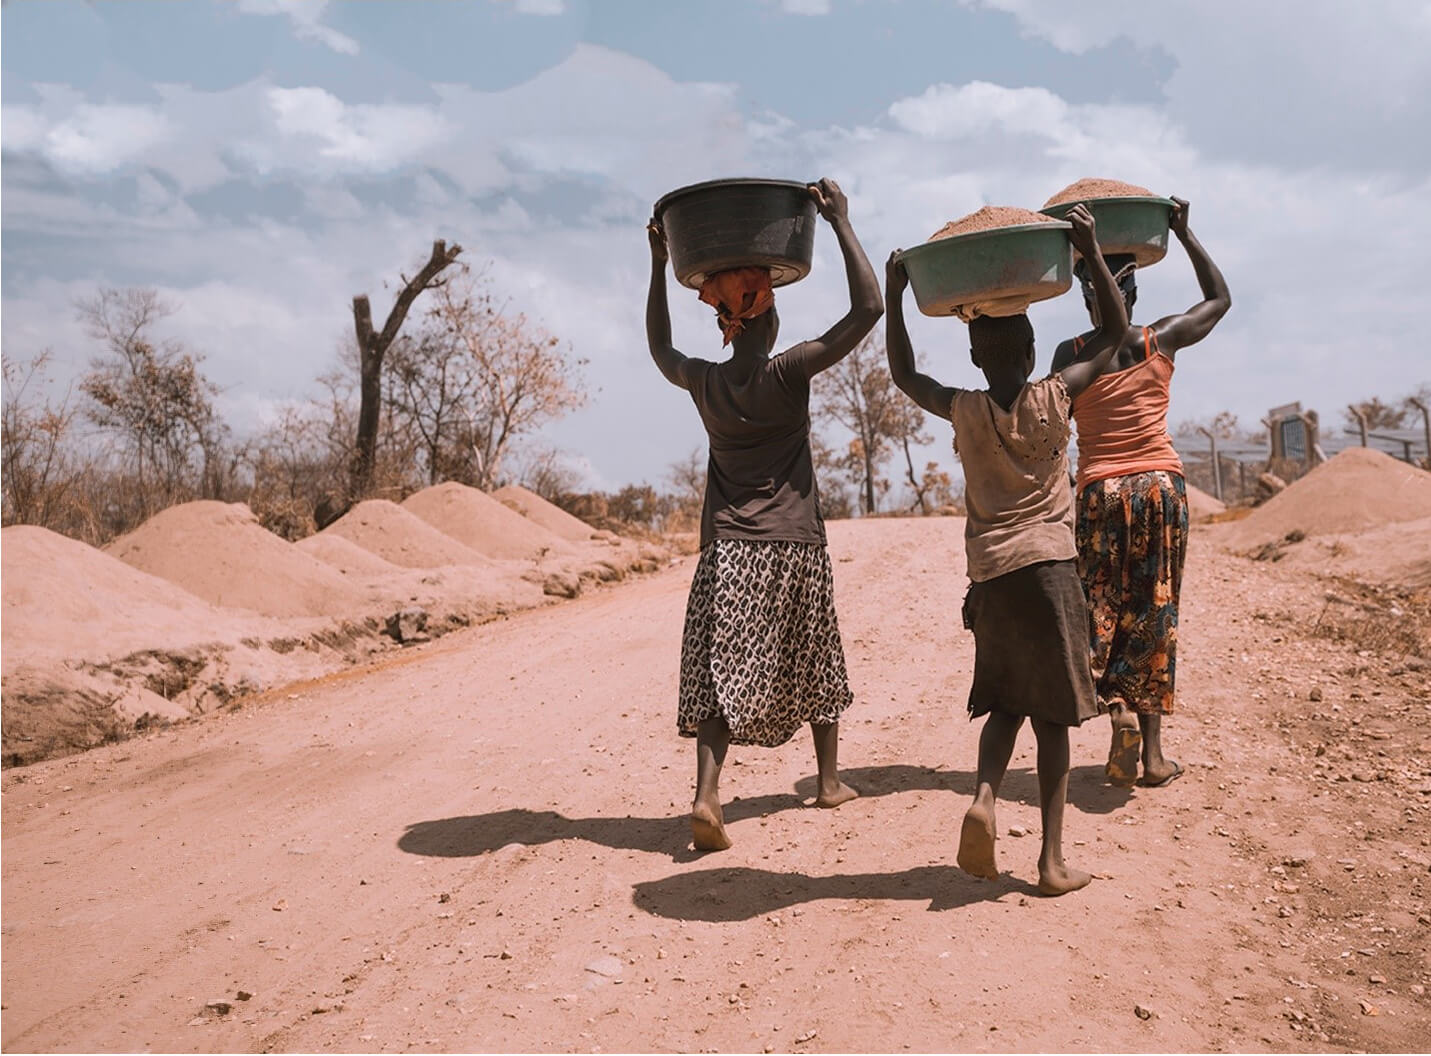 Photo of people in Africa waling along a dirt road while carrying baskets on their heads